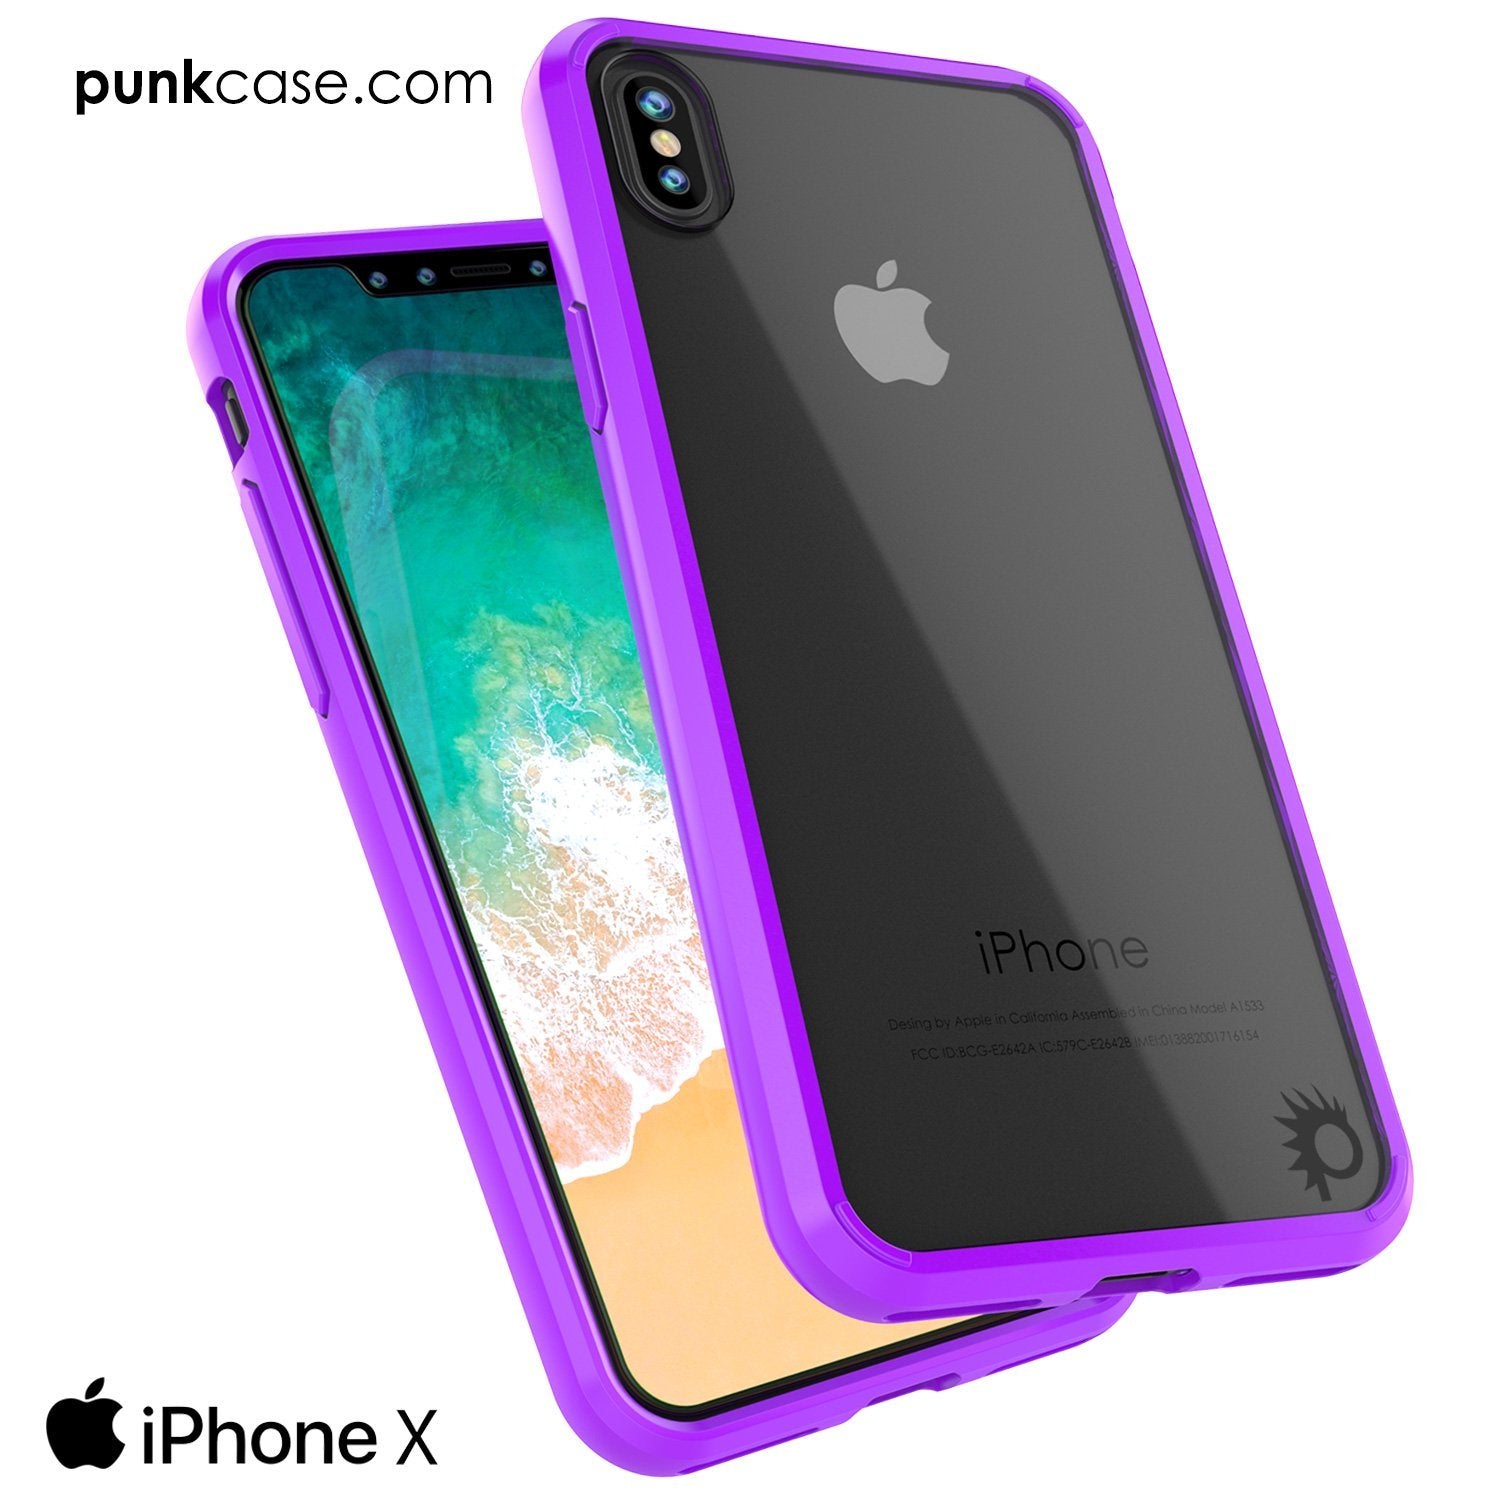 iPhone X Punkcase, LUCID 2.0 Series Slim Fit Dual Layer Cover, Purple